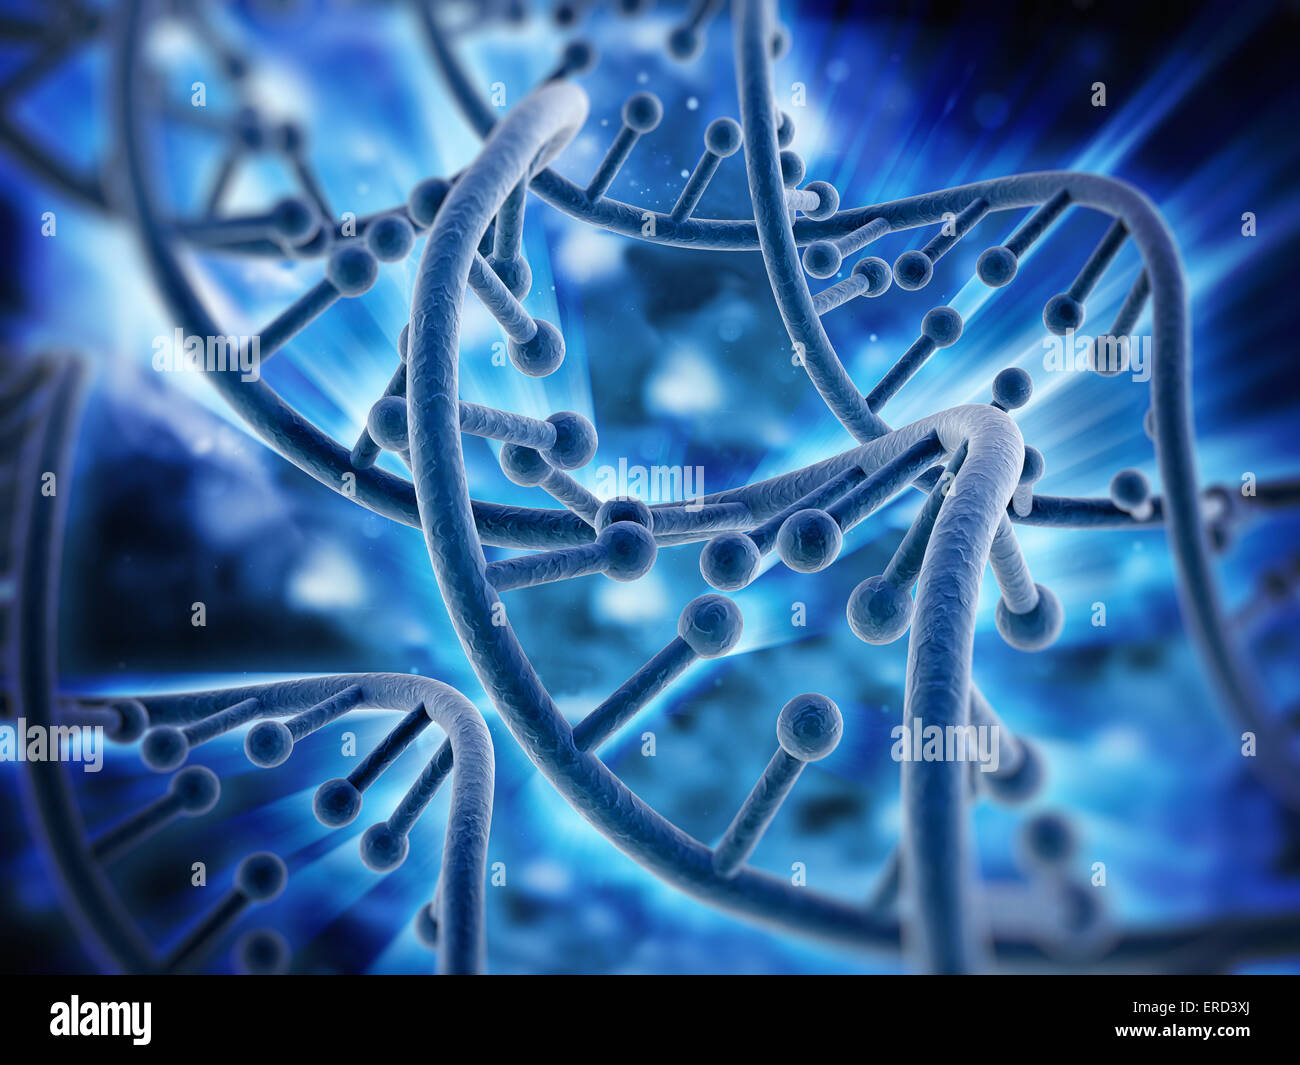 DNA strands background with blue color tones. Stock Photo